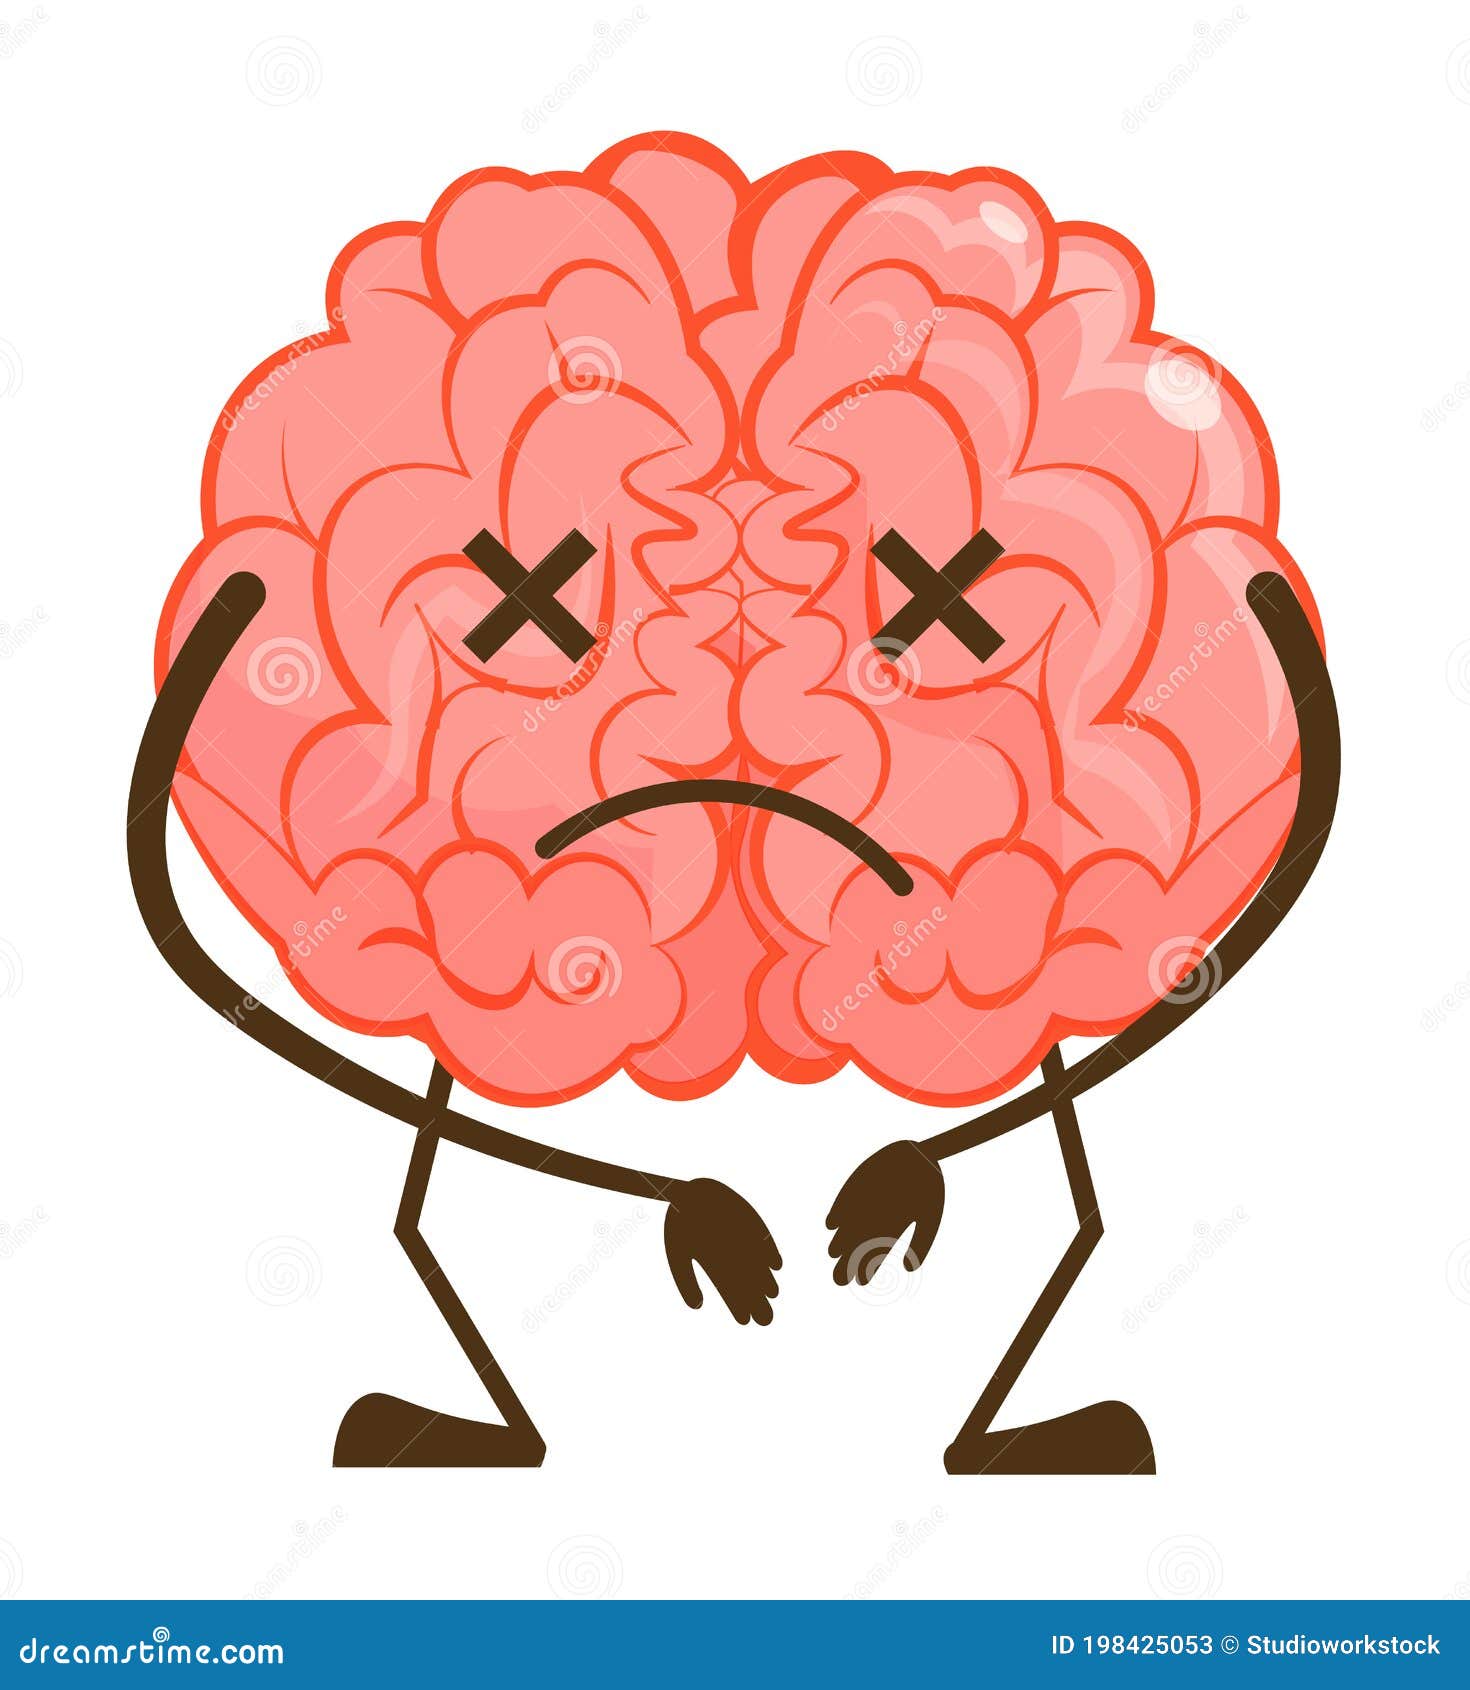 Sad Frustrated Brain Emoticon Isolated on White Stock Vector ...